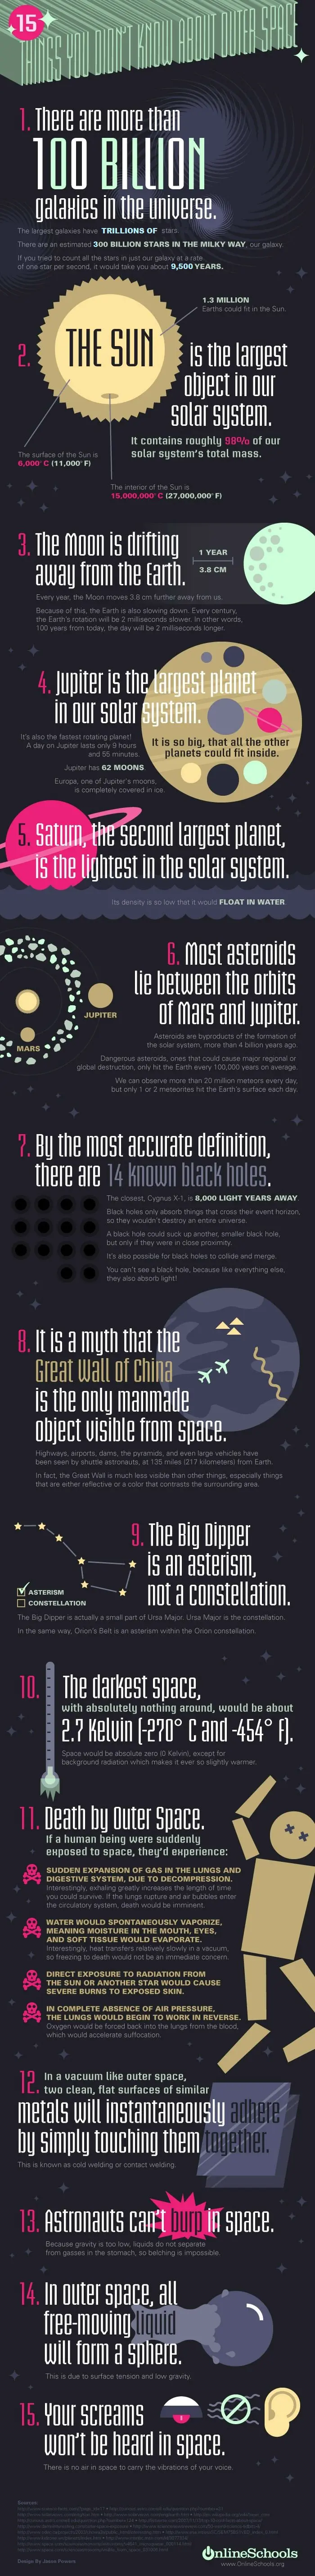 Little Known facts about outer space and the cosmos